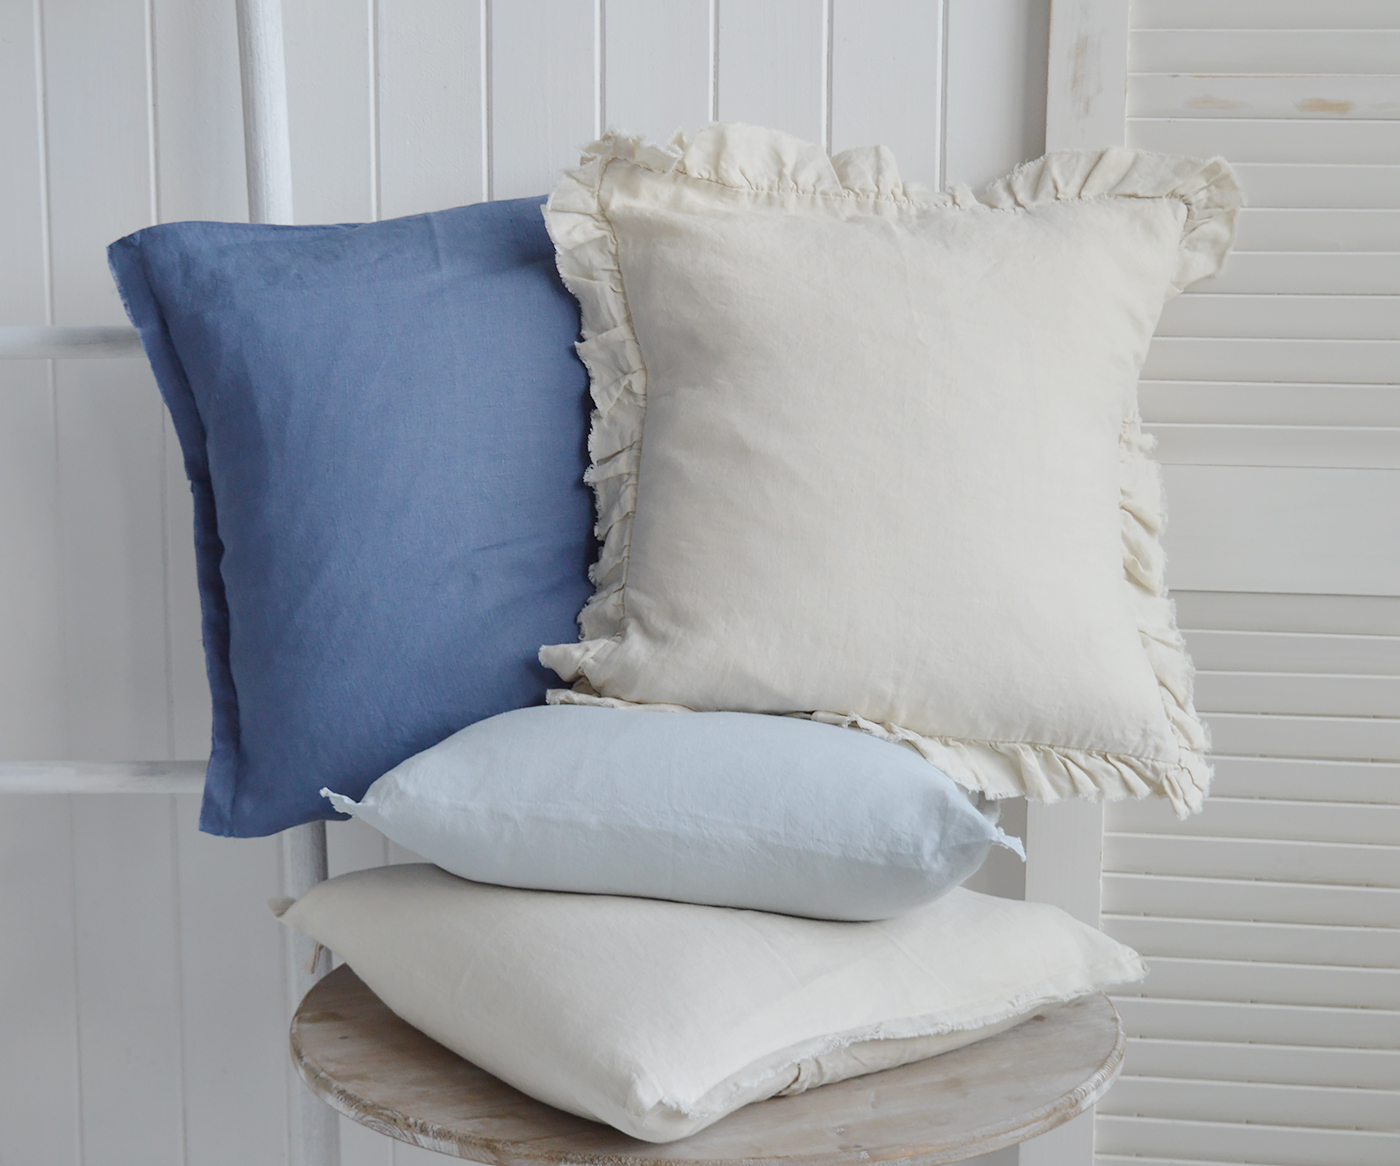 New England cushions and soft furnishings. Hamilton 100% Linen Cushion Covers for coastal, beach house and modern farmhouse interiors - all the cushions together